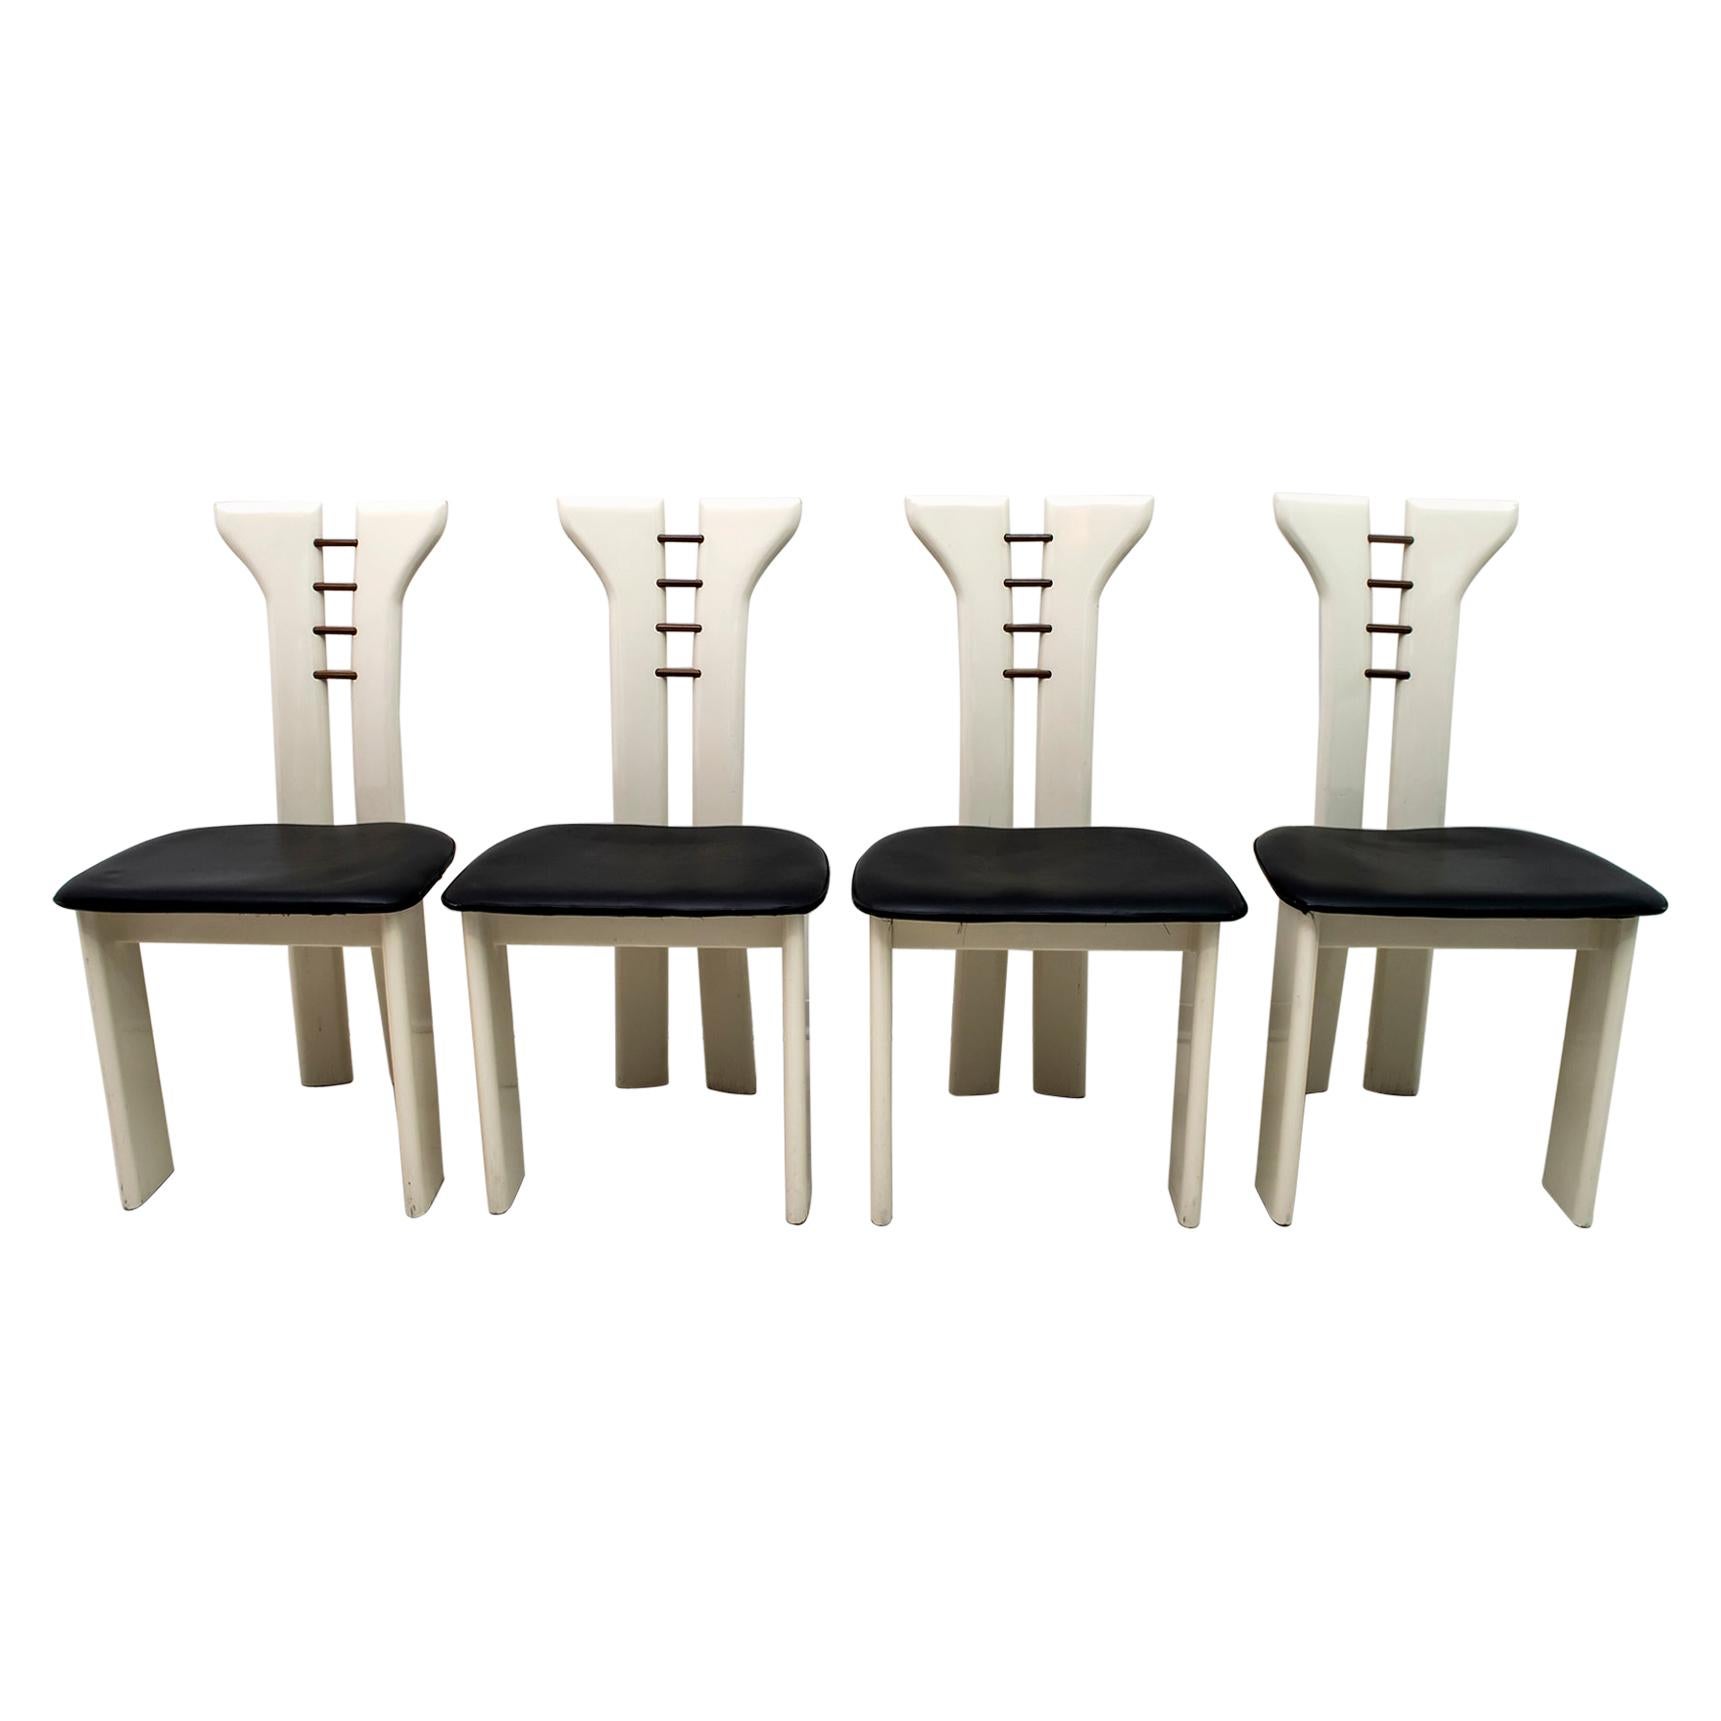 Pierre Cardin Ivory Lacquered Chairs with Wooden Details and Black Leather, 1979